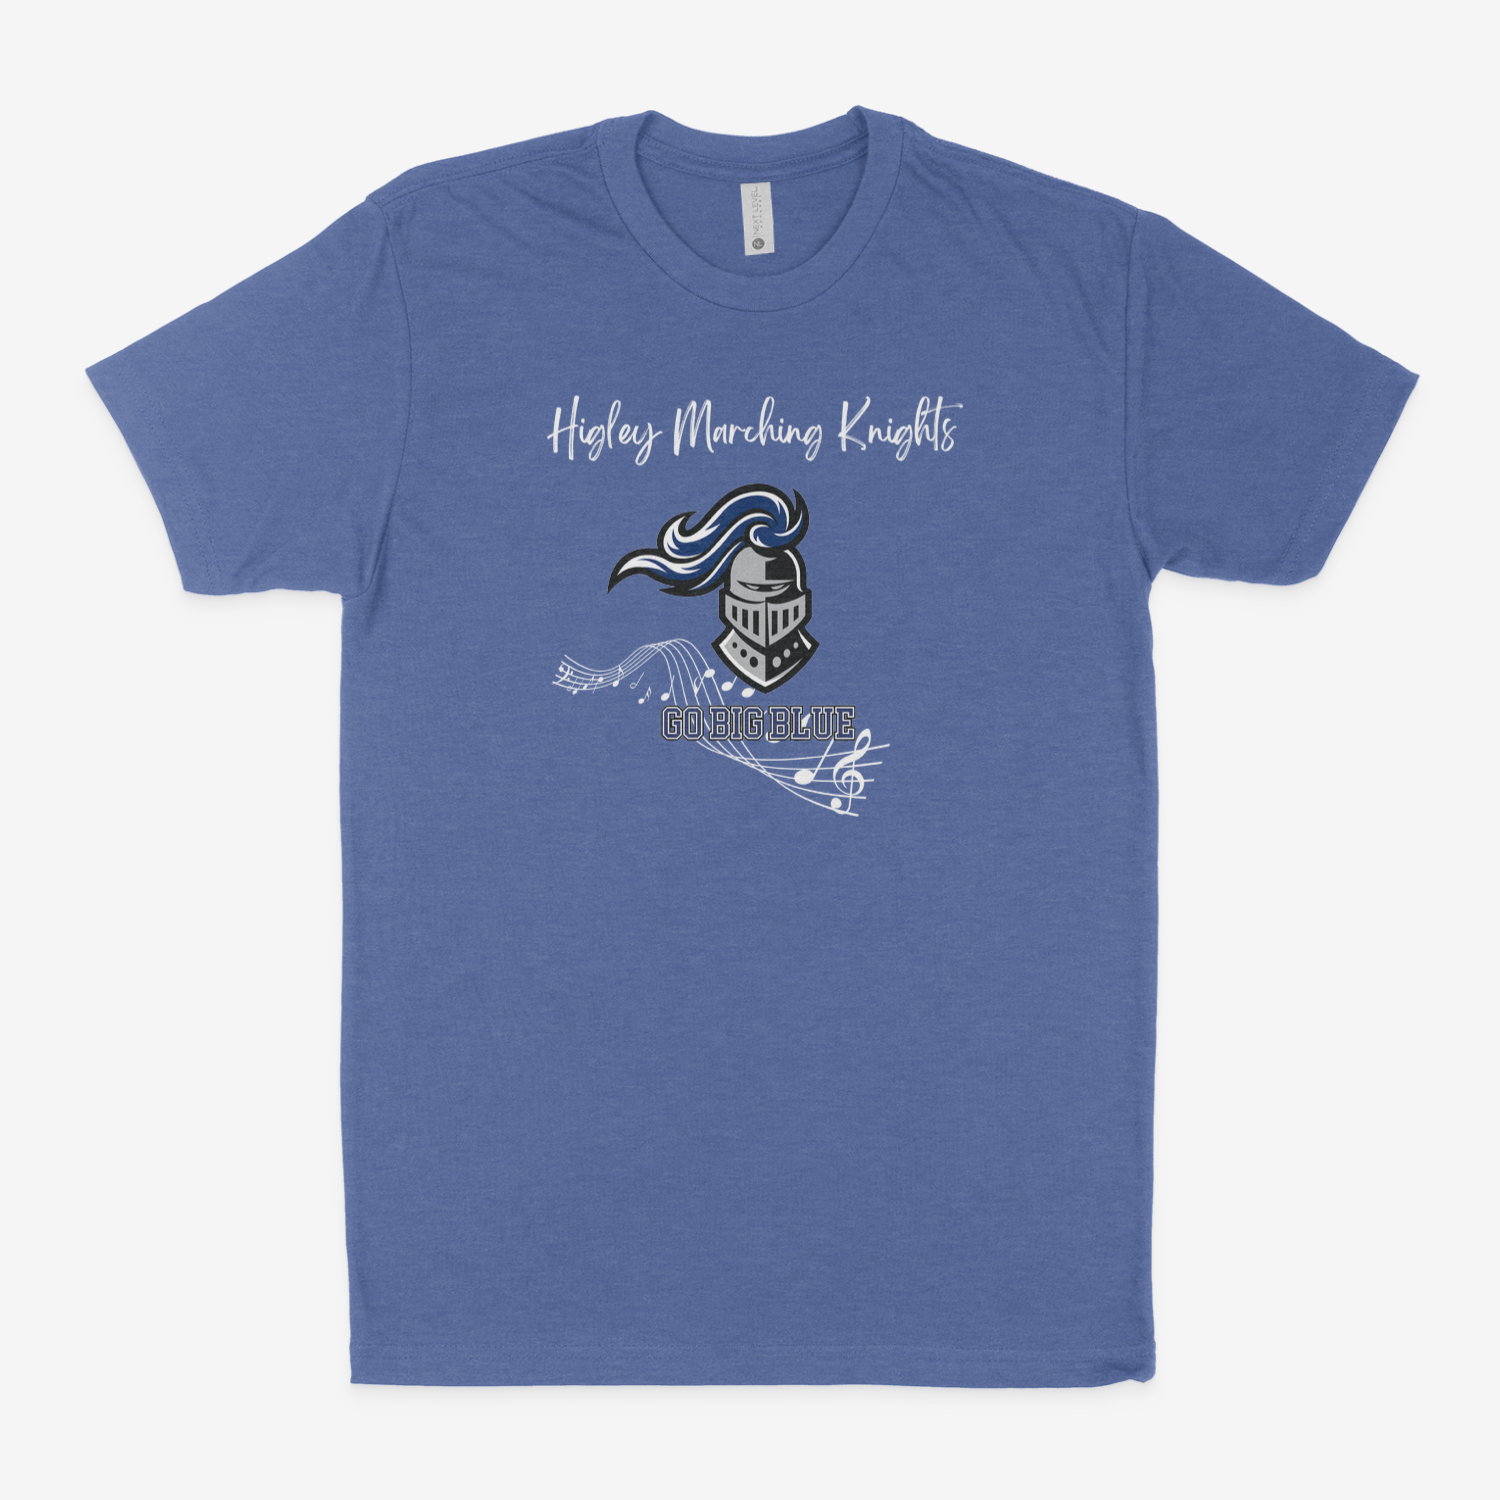 Higley Marching Knights T-Shirt - Parent